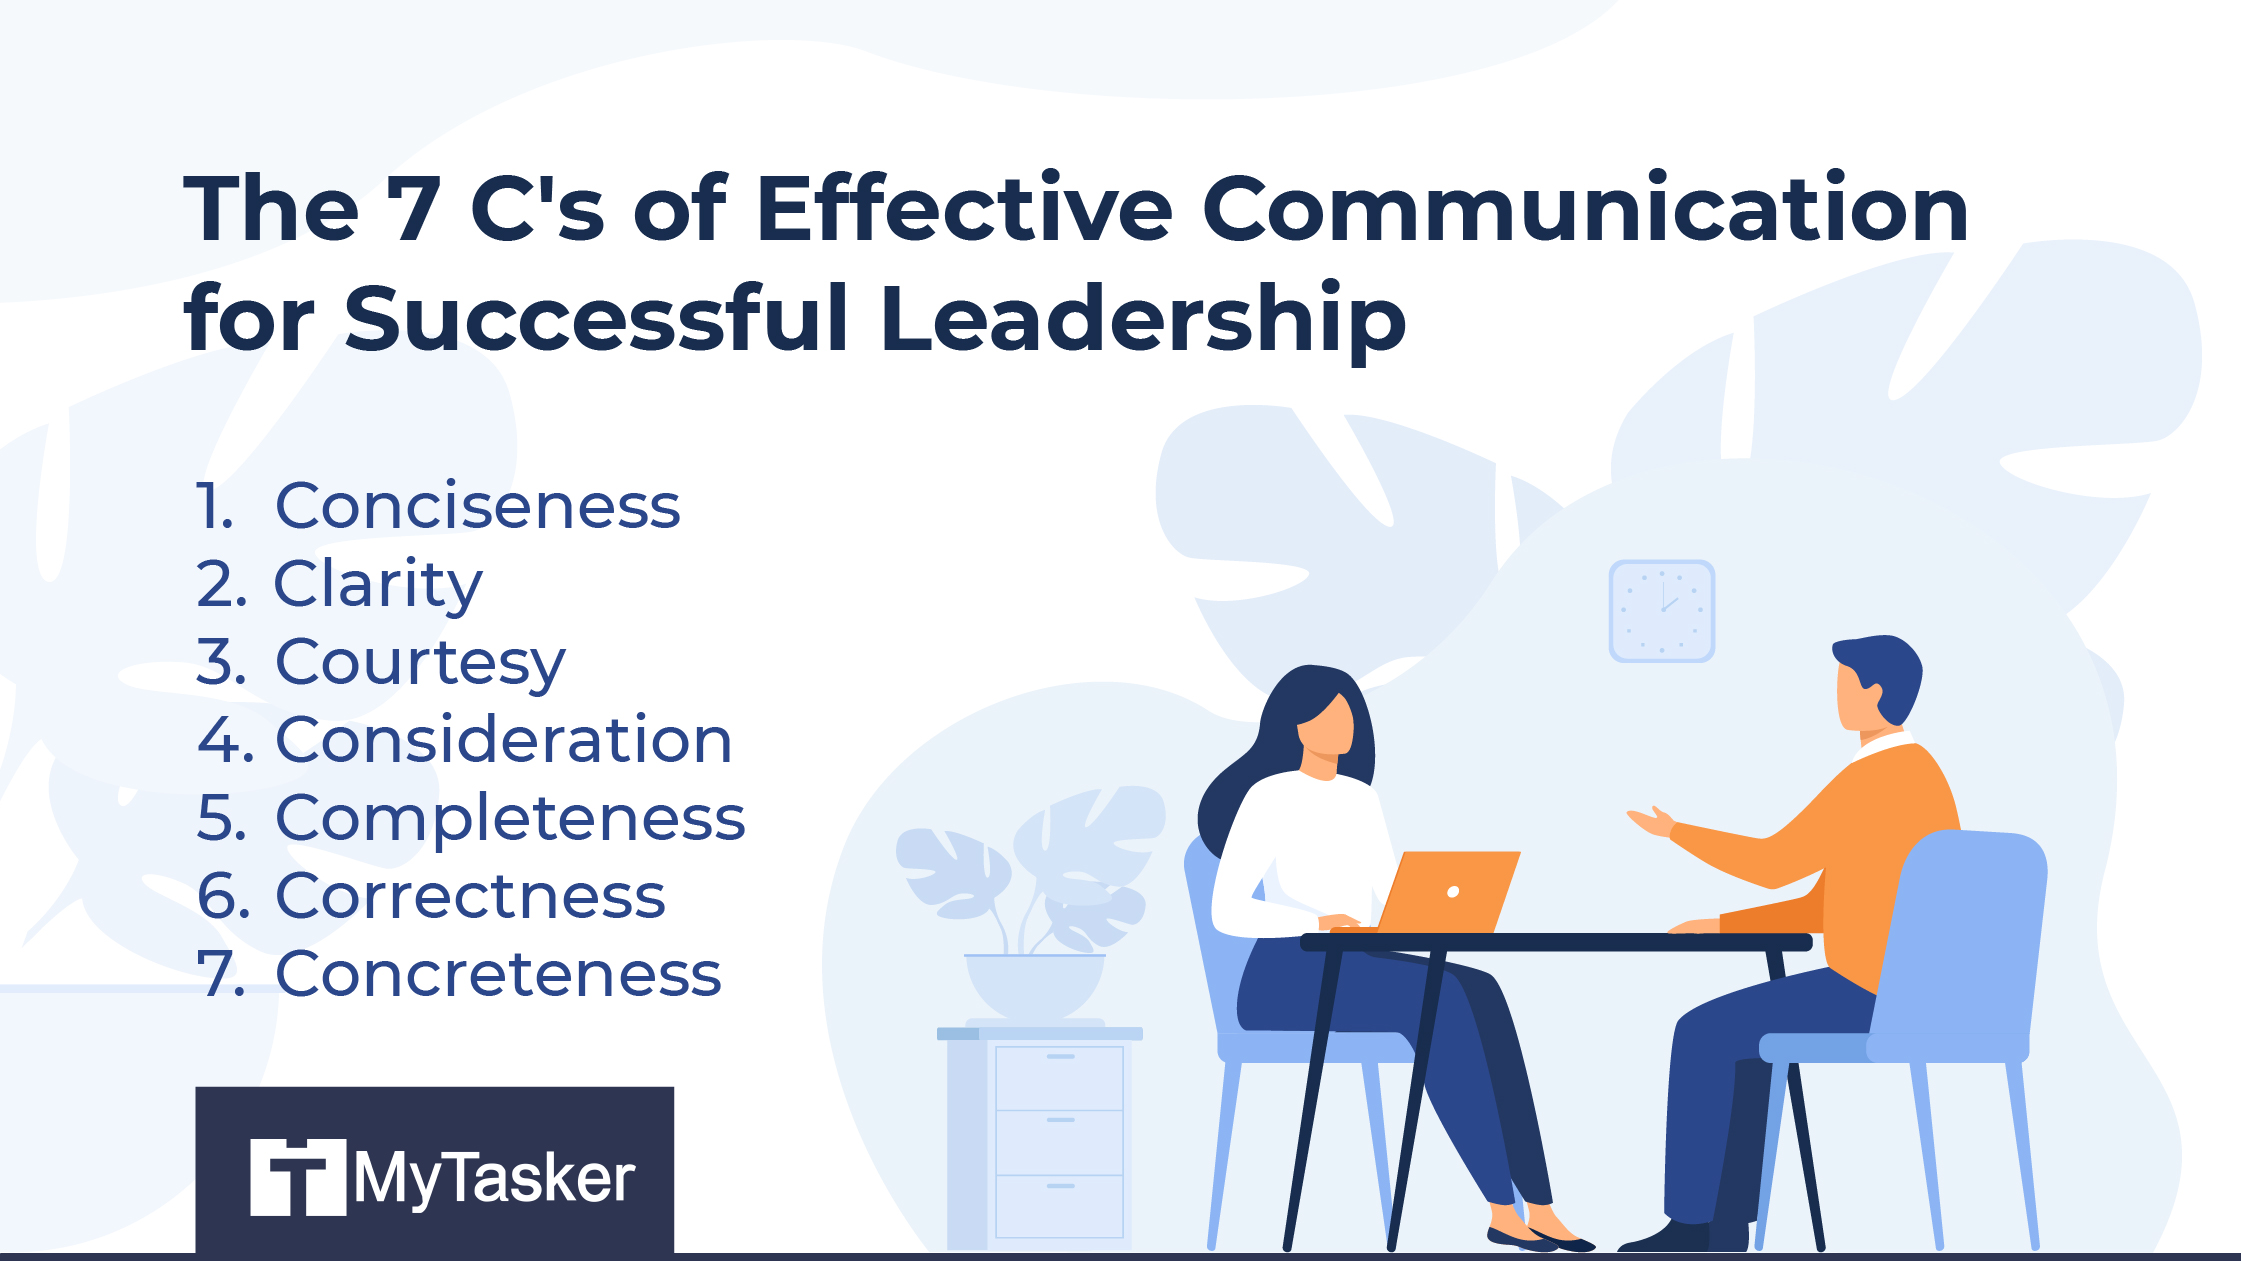 The 7 C's of Effective Communication for Successful Leadership